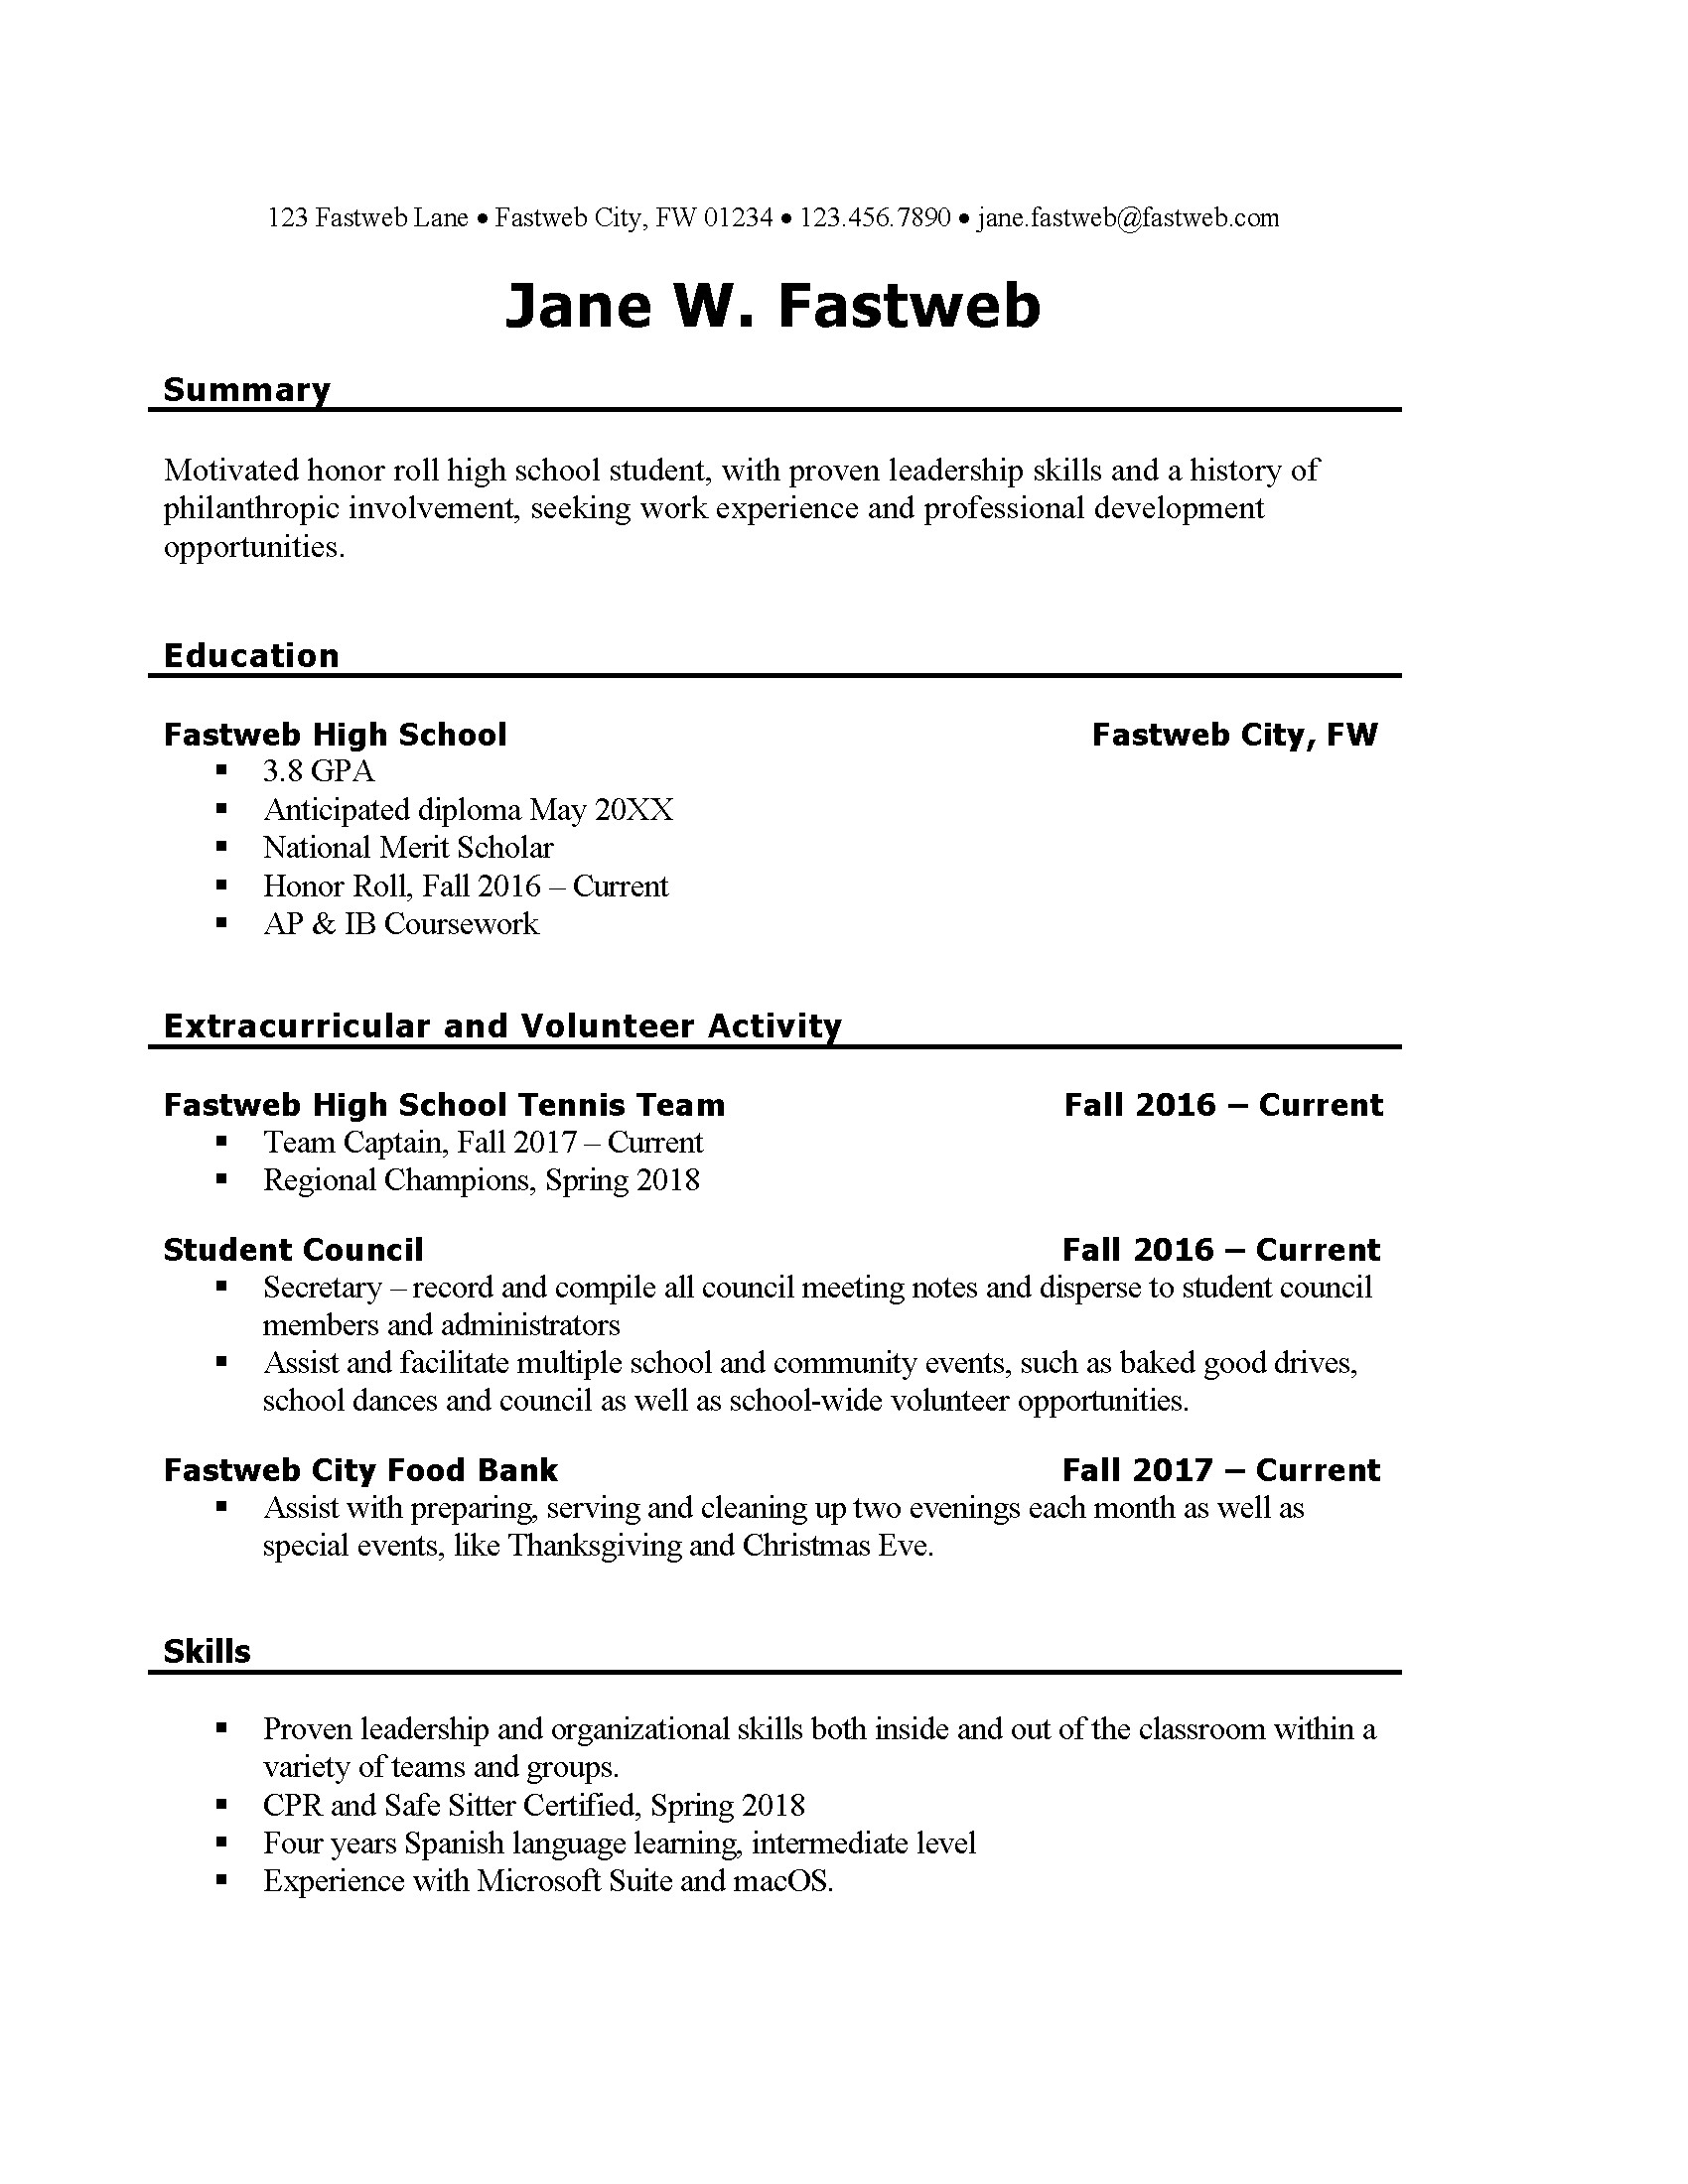 Sample Resume for A First Time Job First Part Time Job Resume Sample